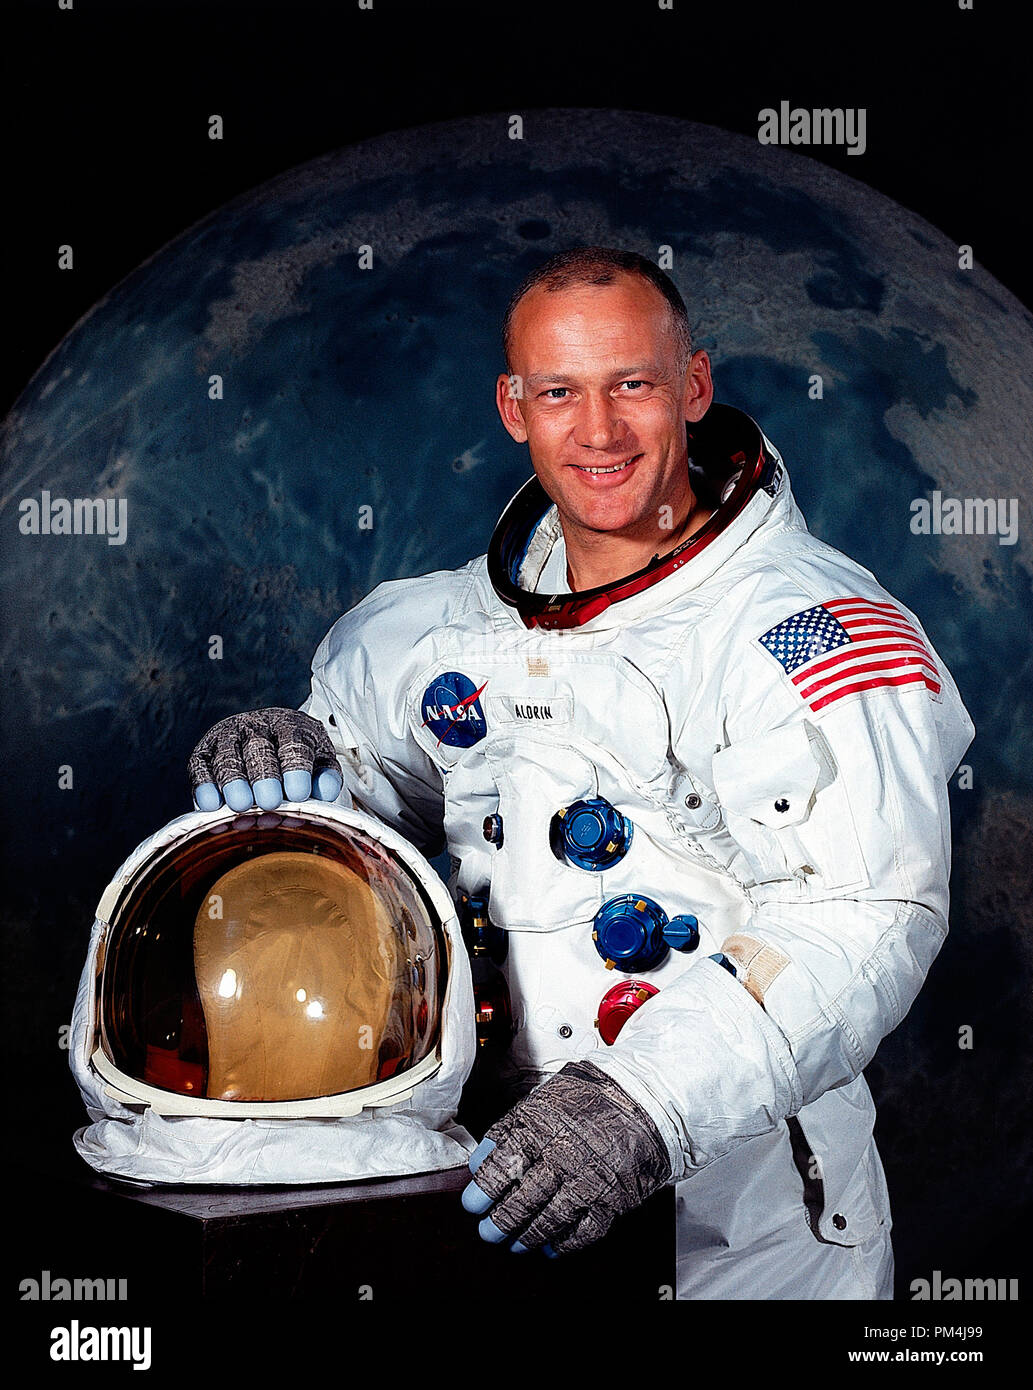 Astronaut Edwin E. Aldrin, Jr. (Buzz), July 1969. Aldrin was the second person to walk on the Moon. He was the Lunar Module Pilot on Apollo 11, the first manned lunar landing in history. He set foot on the Moon at 03:15:16 on July 21, 1969 (UTC), following mission commander Neil Armstrong.   File Reference # 1003 616THA Stock Photo